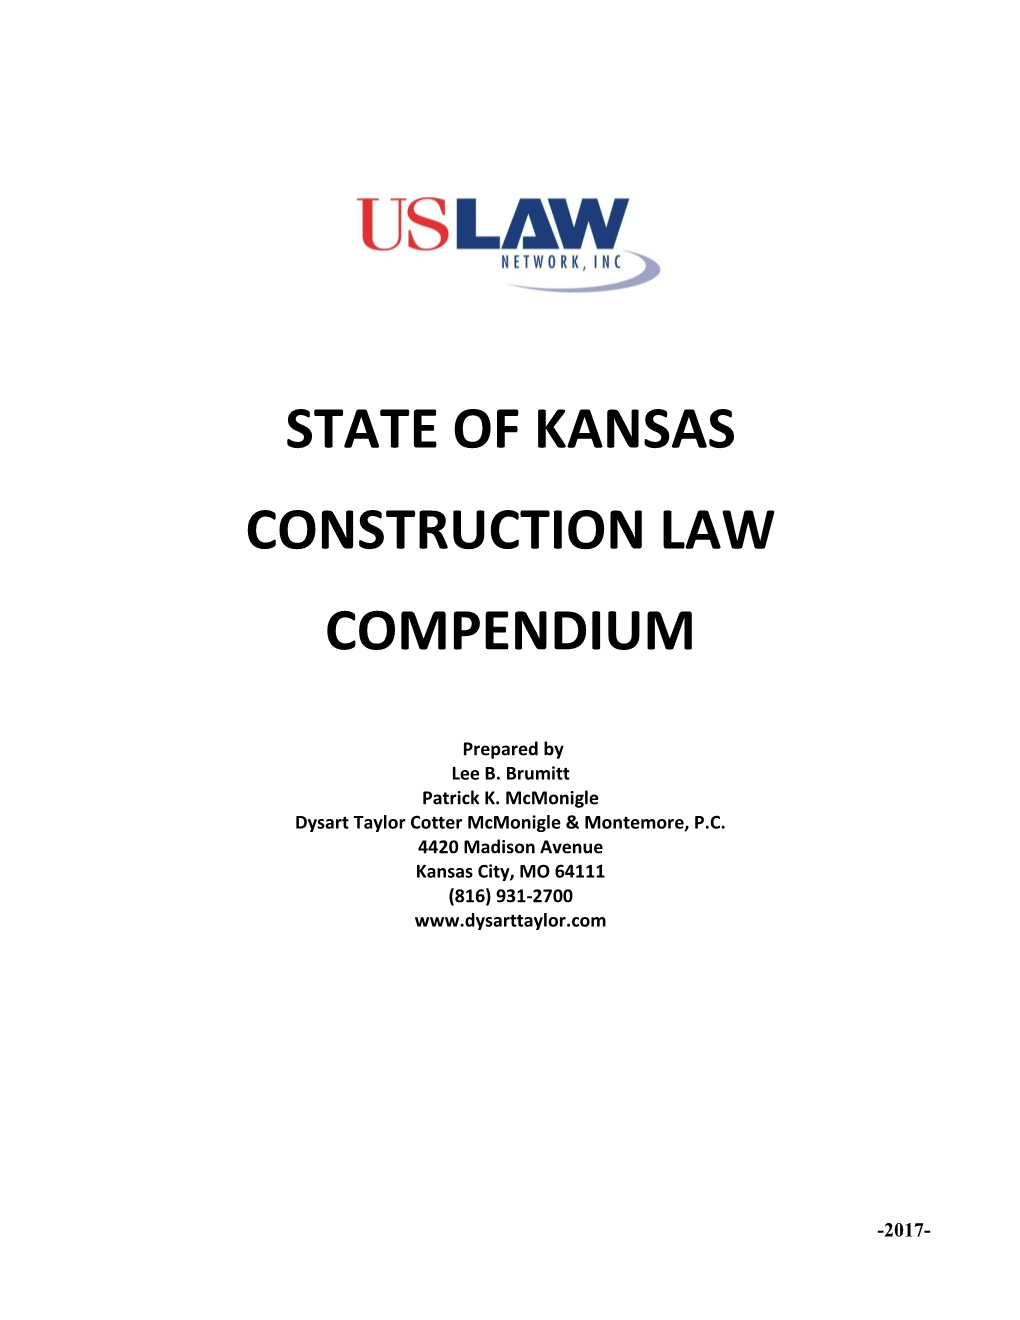 State of Kansas Construction Law Compendium